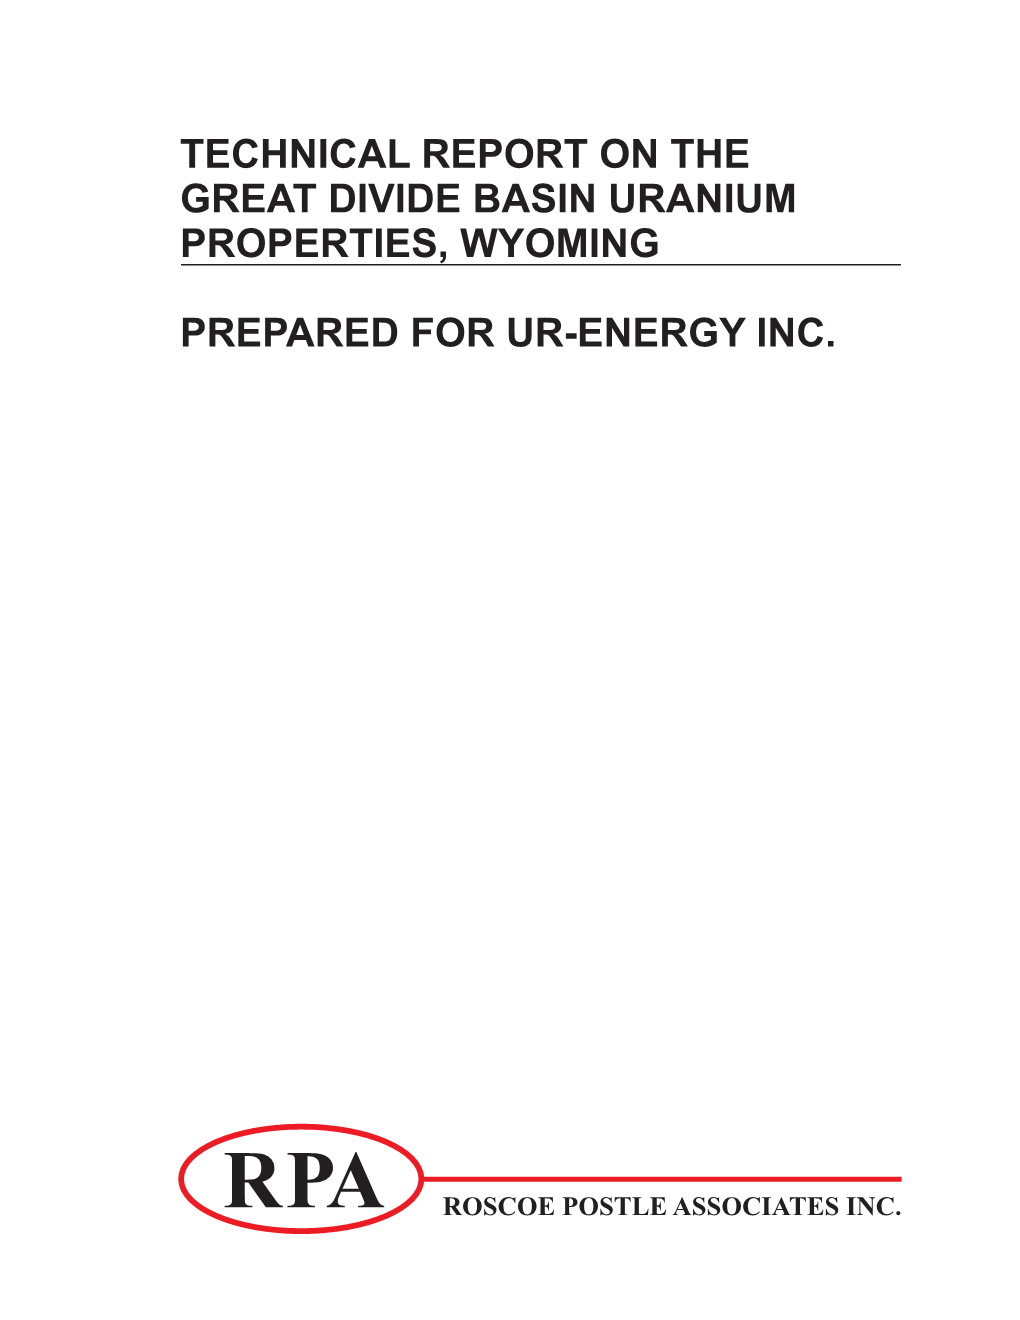 Technical Report on the Great Divide Basin Uranium Properties, Wyoming